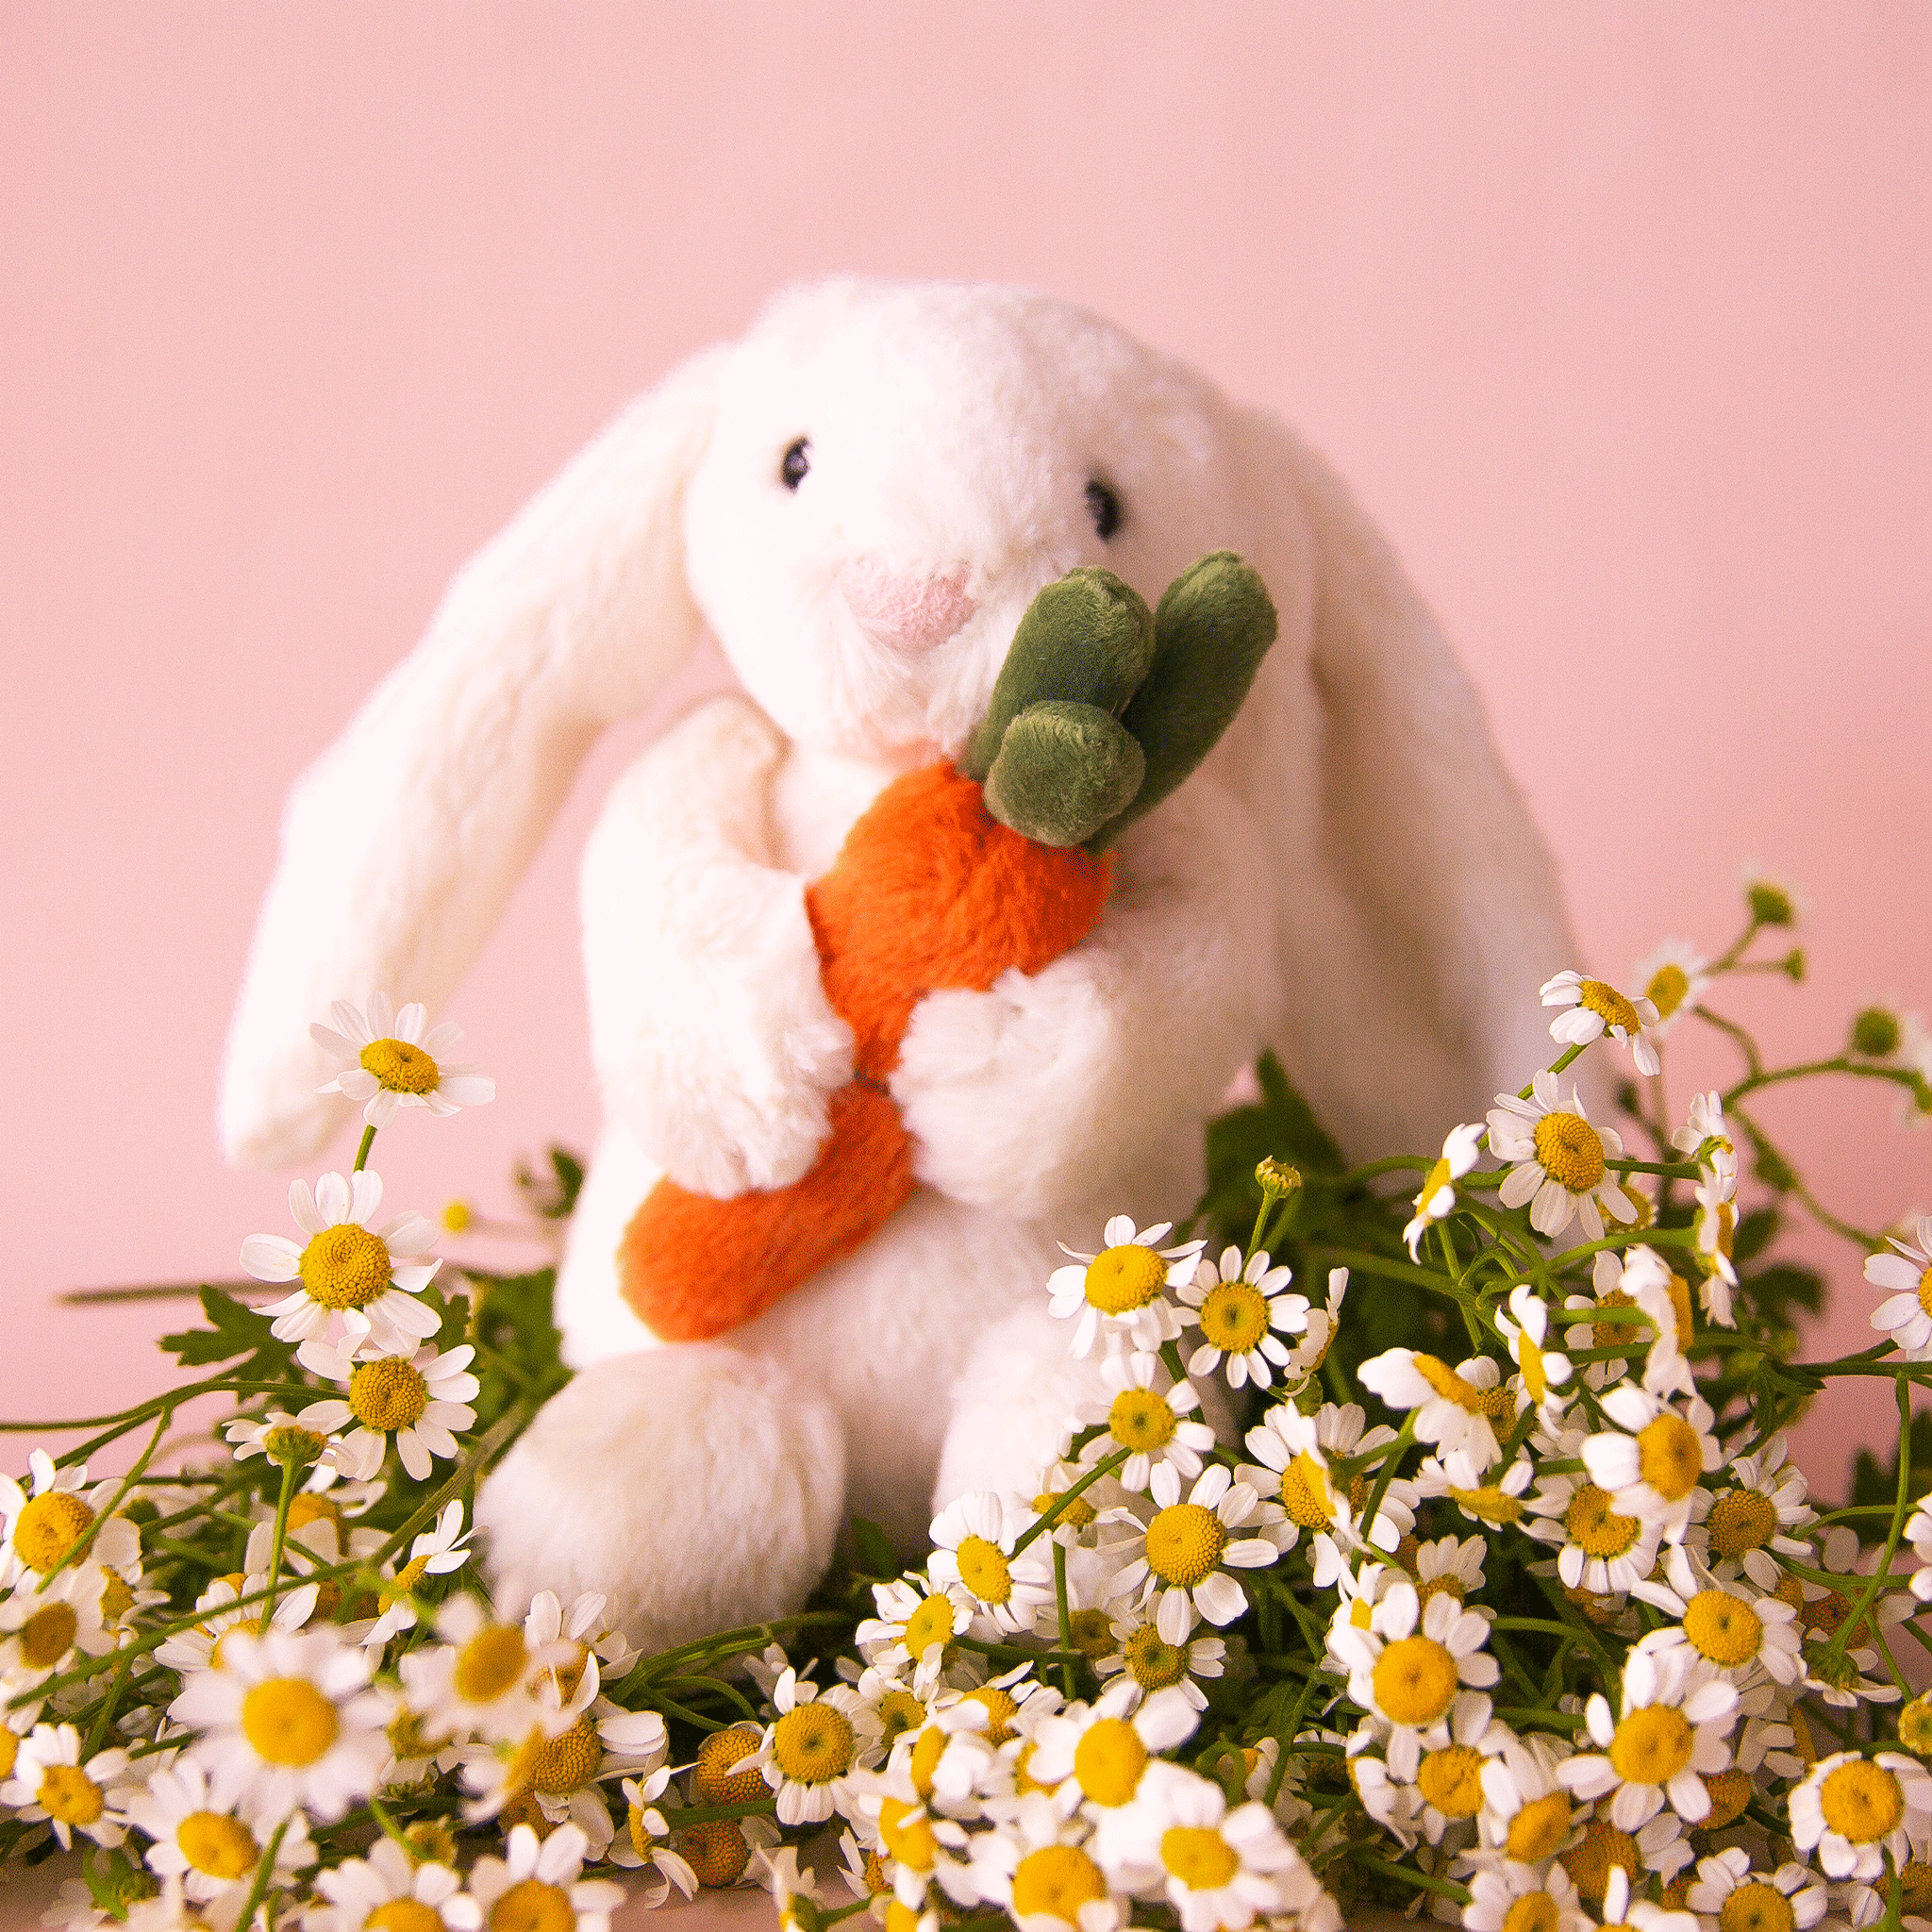 On pink background is a white stuffed toy bunny with long floppy ears and holding an orange stuffed toy carrot.